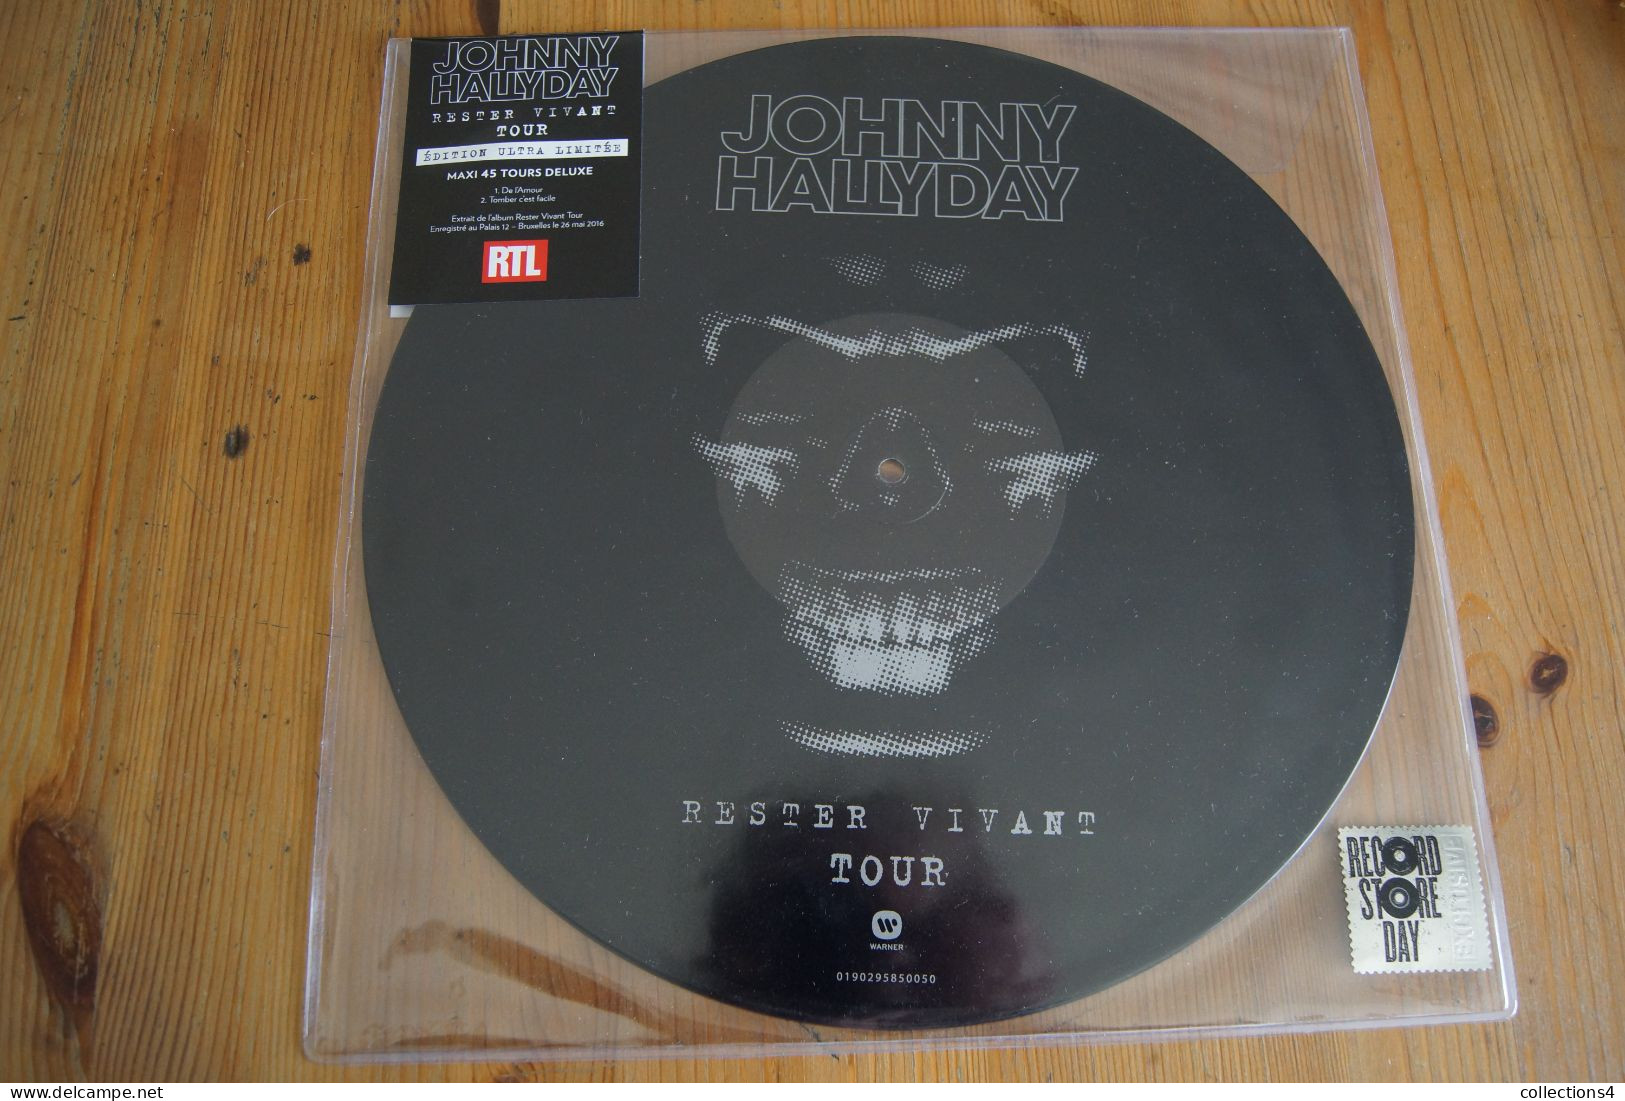 JOHNNY HALLYDAY RESTER VIVANT PICTURES DISC  EDITION ULTRA LIMITEE MAXI 45T  VALEUR+ NEUF SCELLE 2017 - 45 Rpm - Maxi-Singles